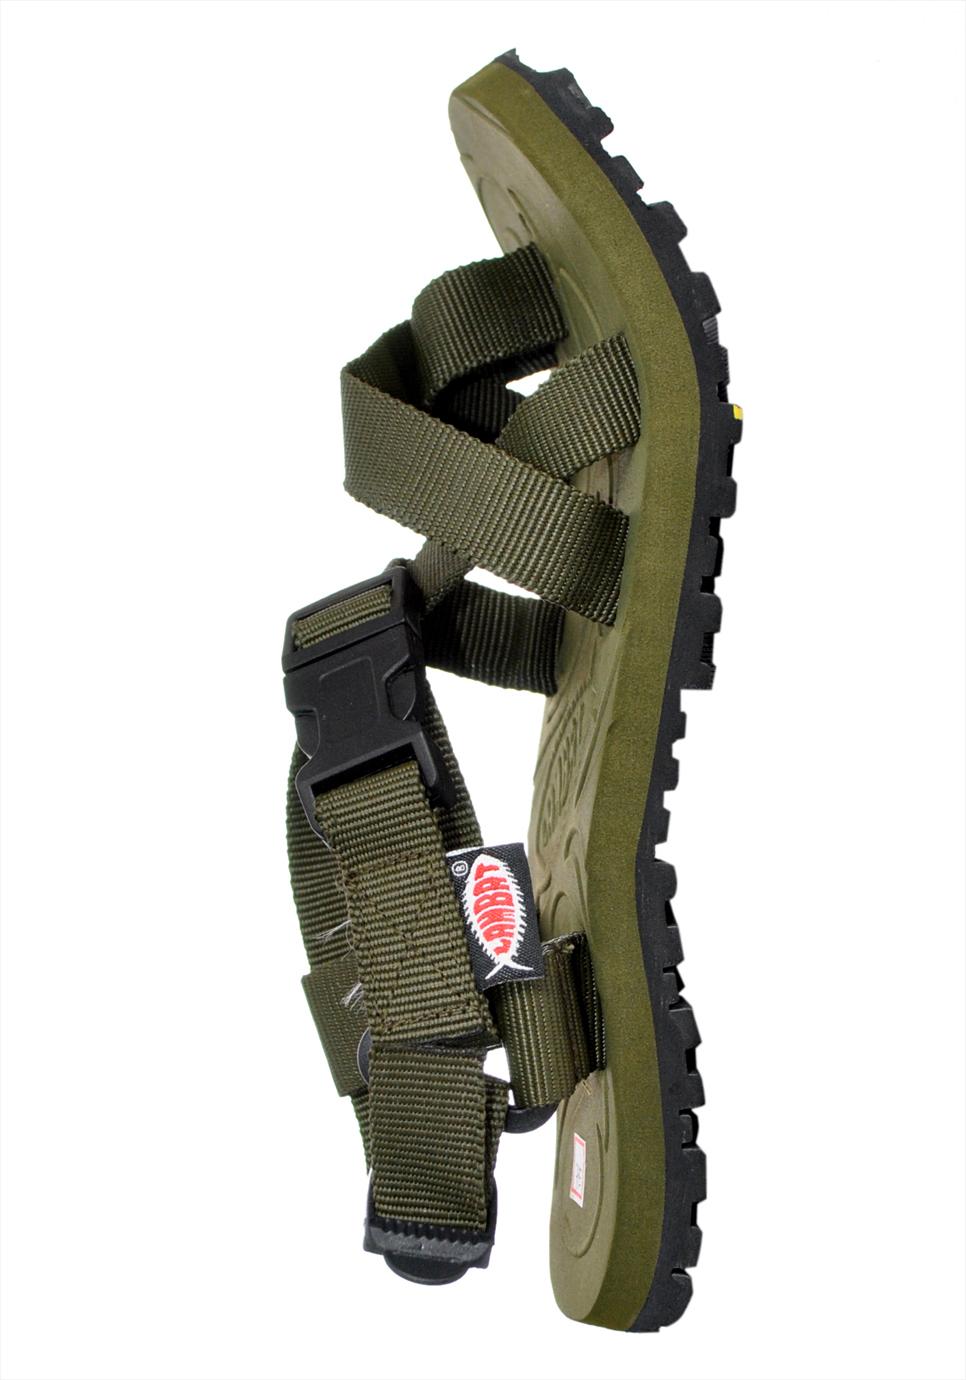 Lambat Outdoor Sandals for Women (Army 